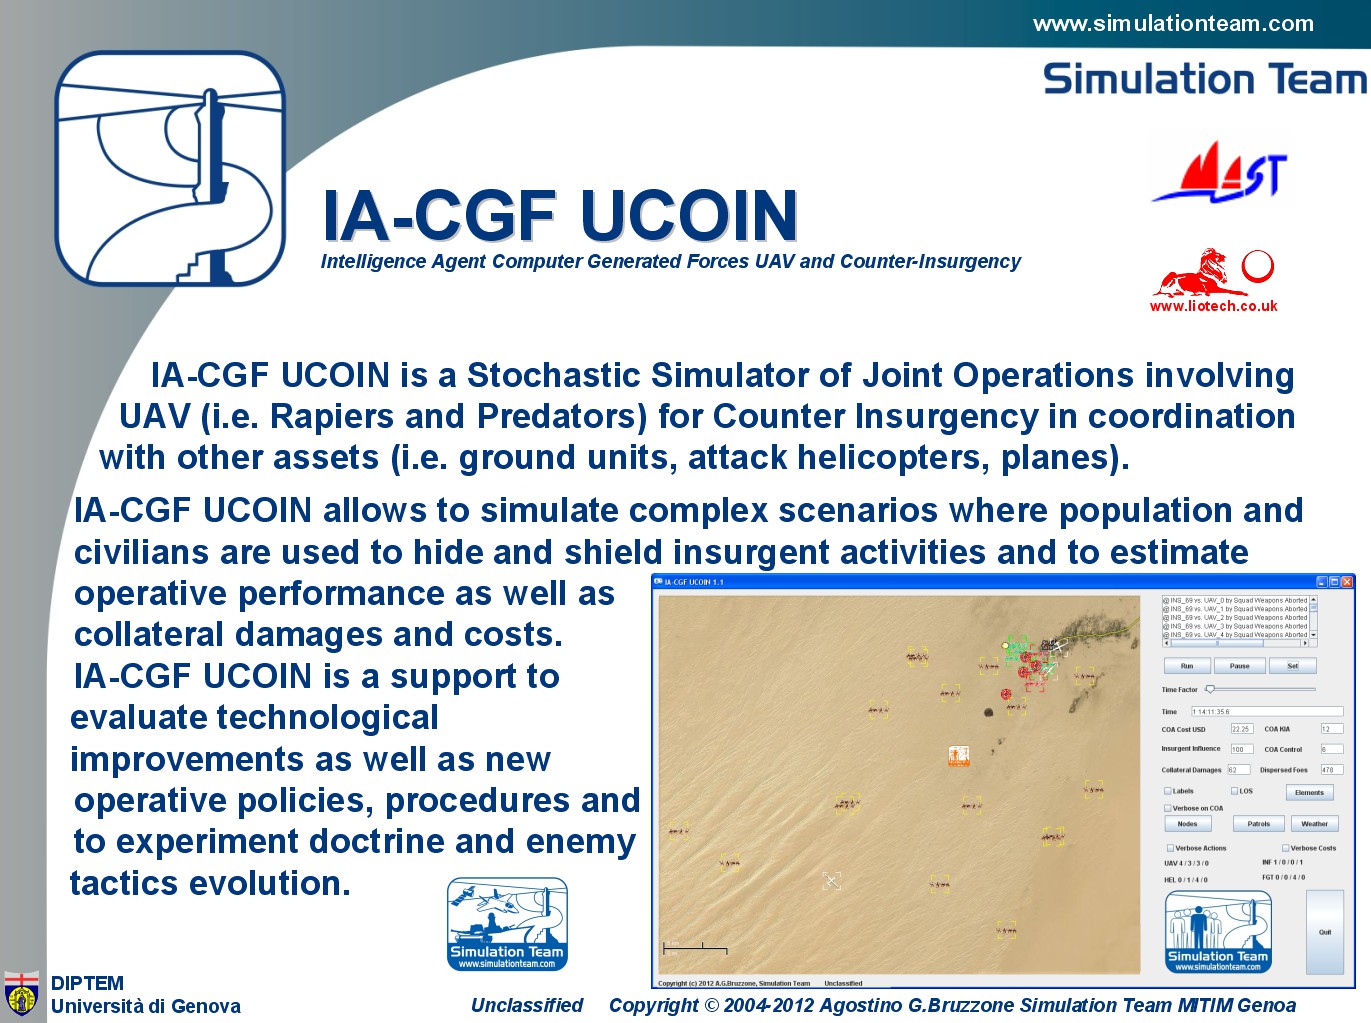 IA-CGF UCOIN Intelligence Agent Computer Generated Forces UAV and Counter-Insurgency